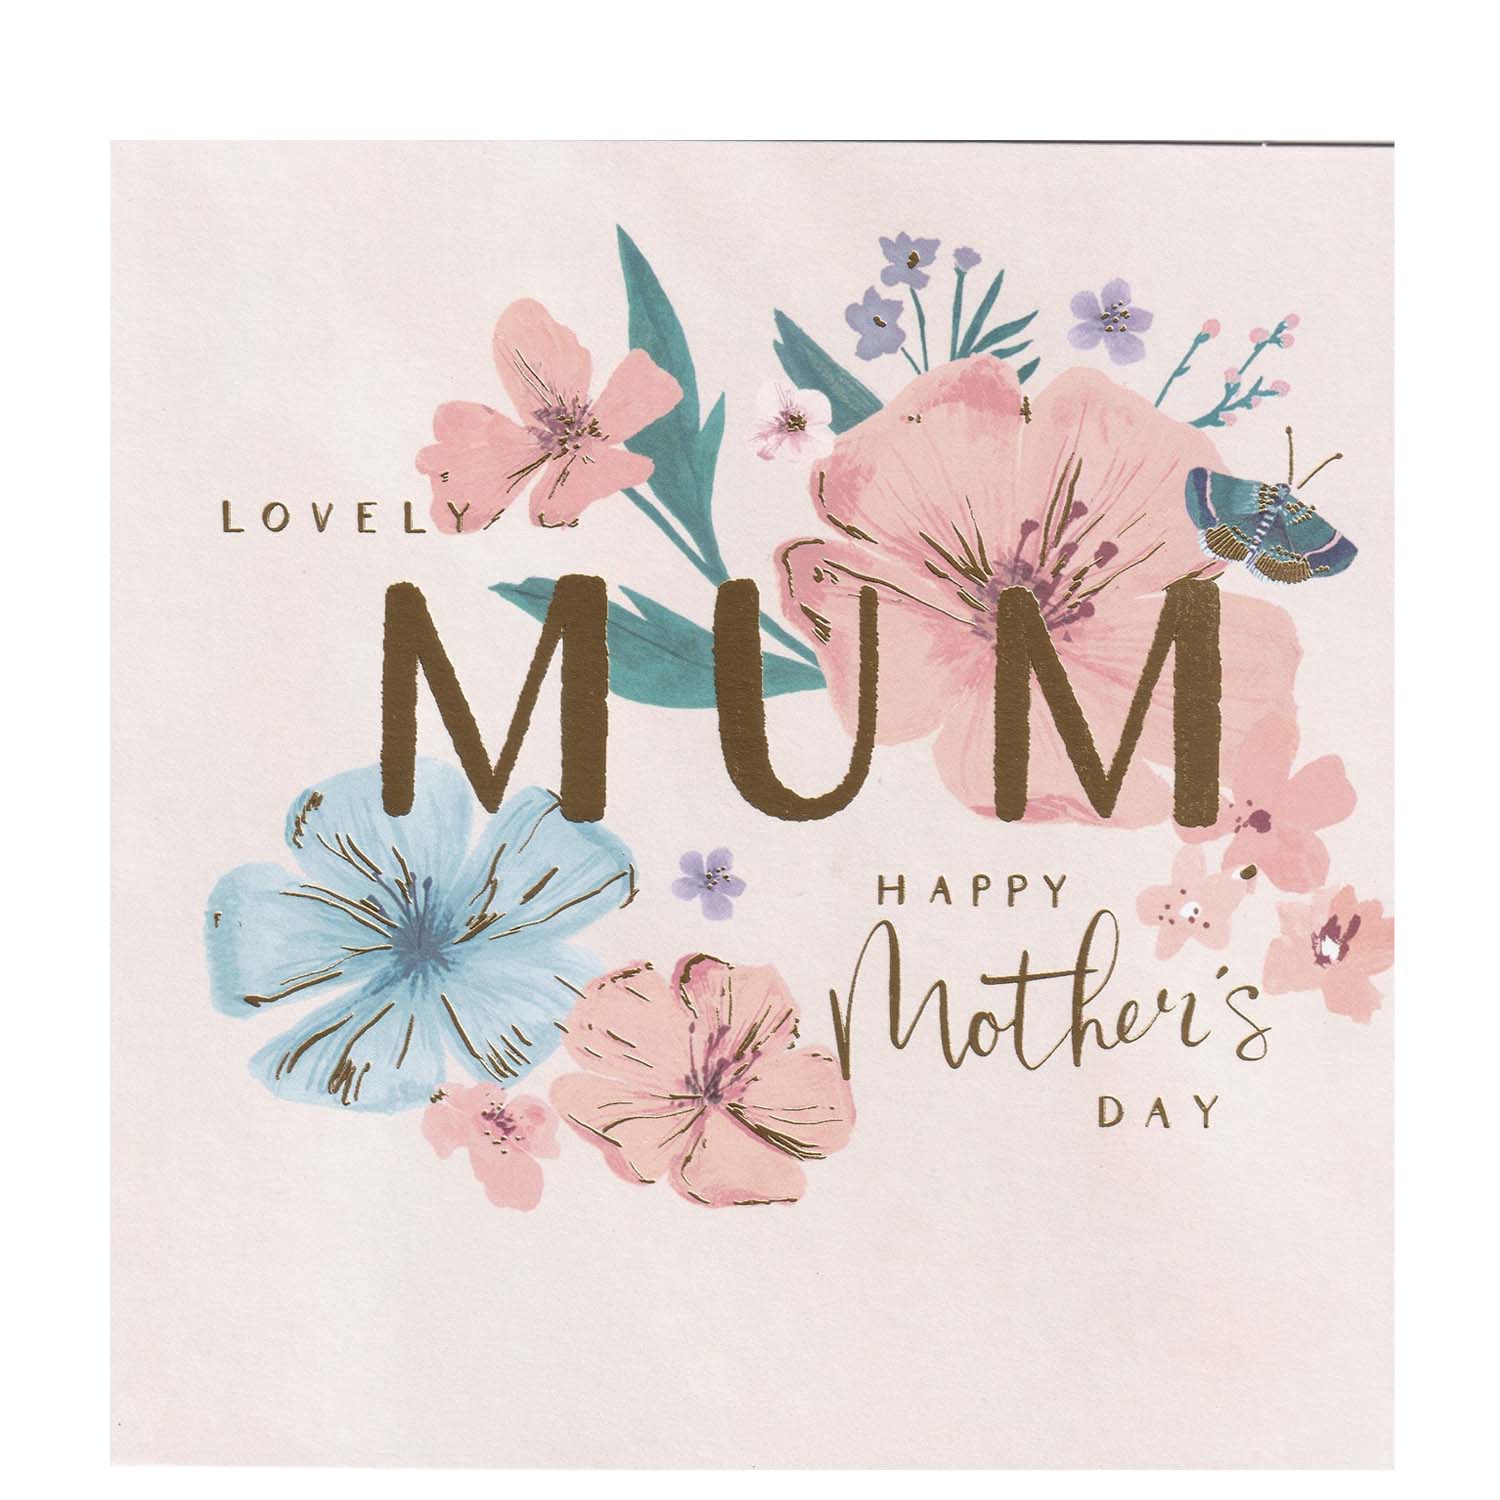 Happy Mothers Day Lovely Mum Greeting Card